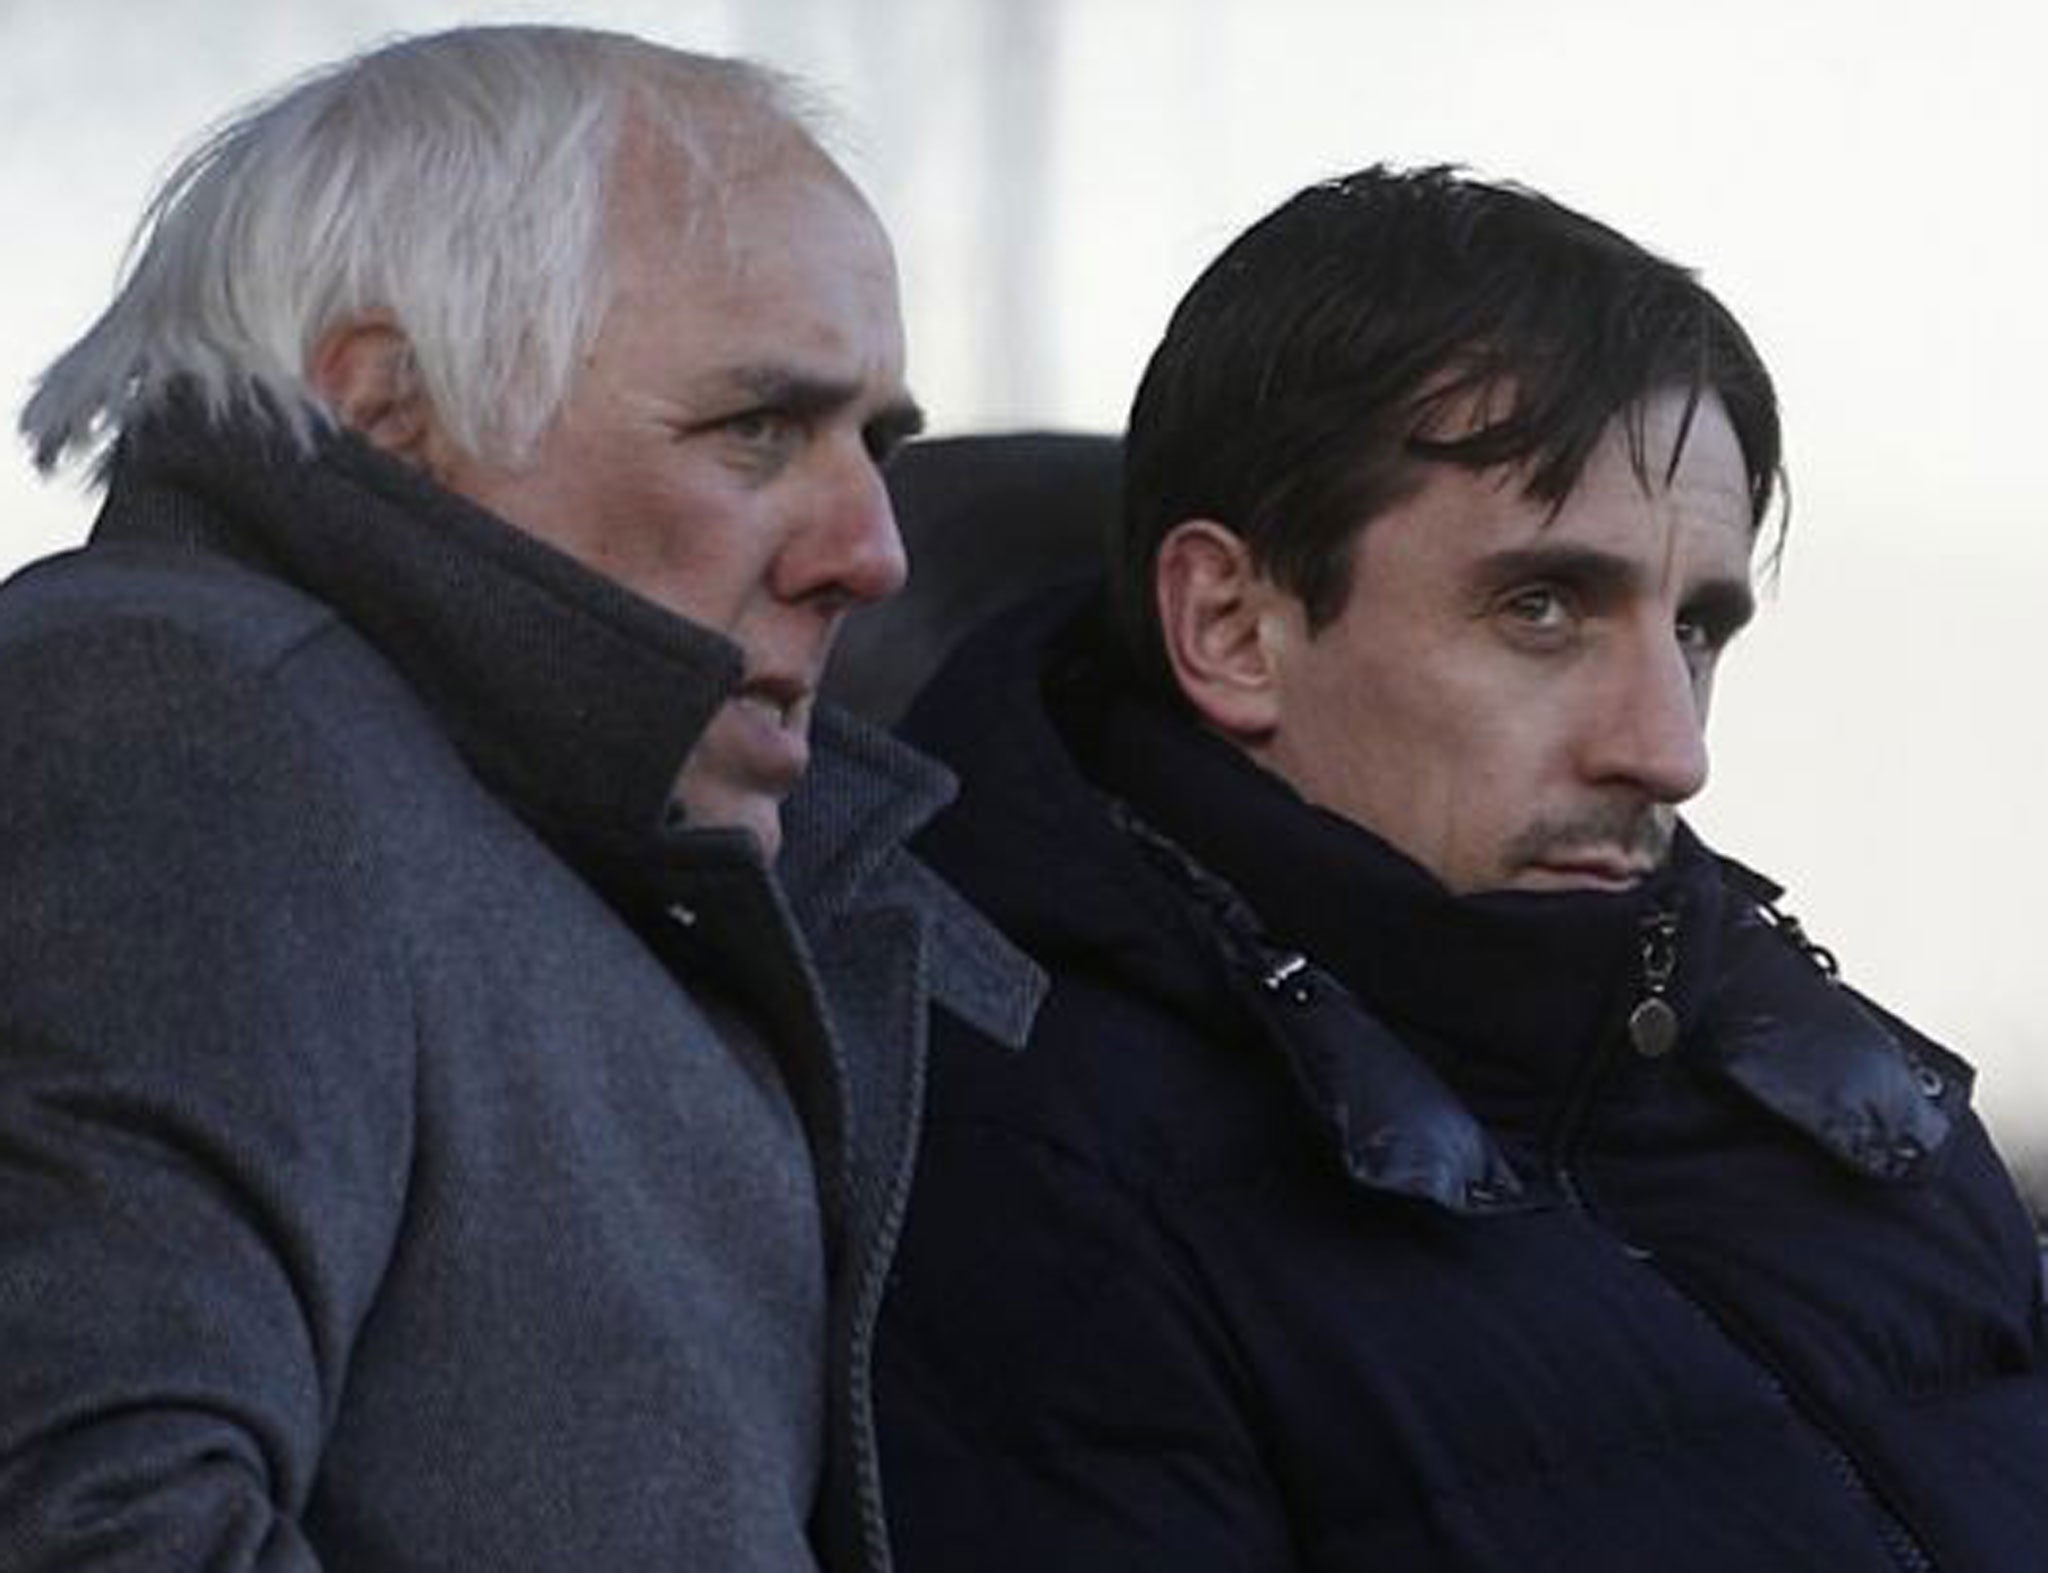 Neville Neville (left), seen here with his son Gary Neville, has been arrested in connection with an alleged sexual assault